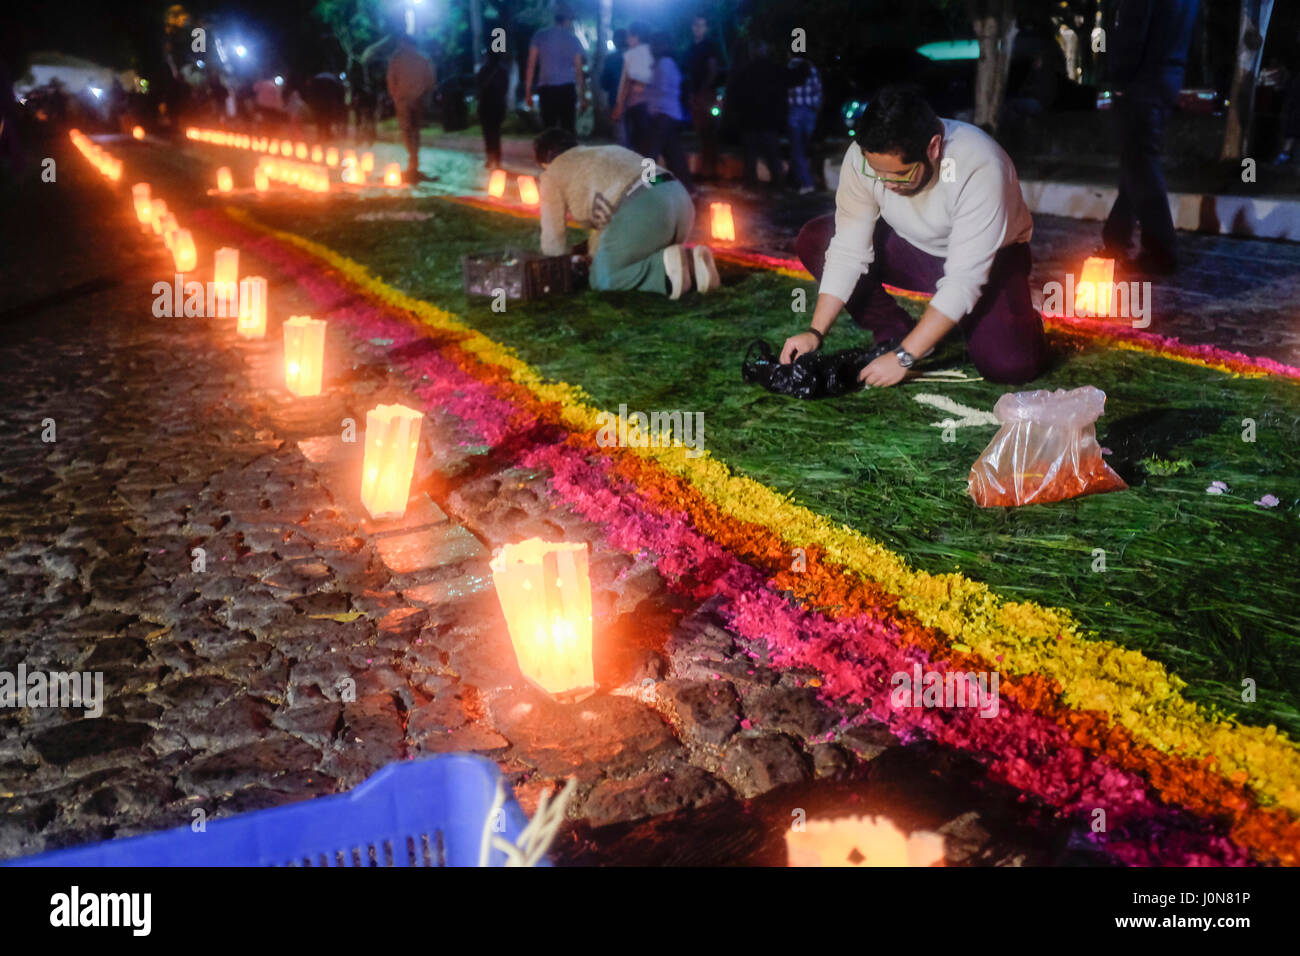 Parishioners from the Escuela de Cristo church spread flower pedals to create an 'alfombra', or carpet, as part of the annual Holy Week processions in Antigua, Guatemala on April 14, 2017. Stock Photo